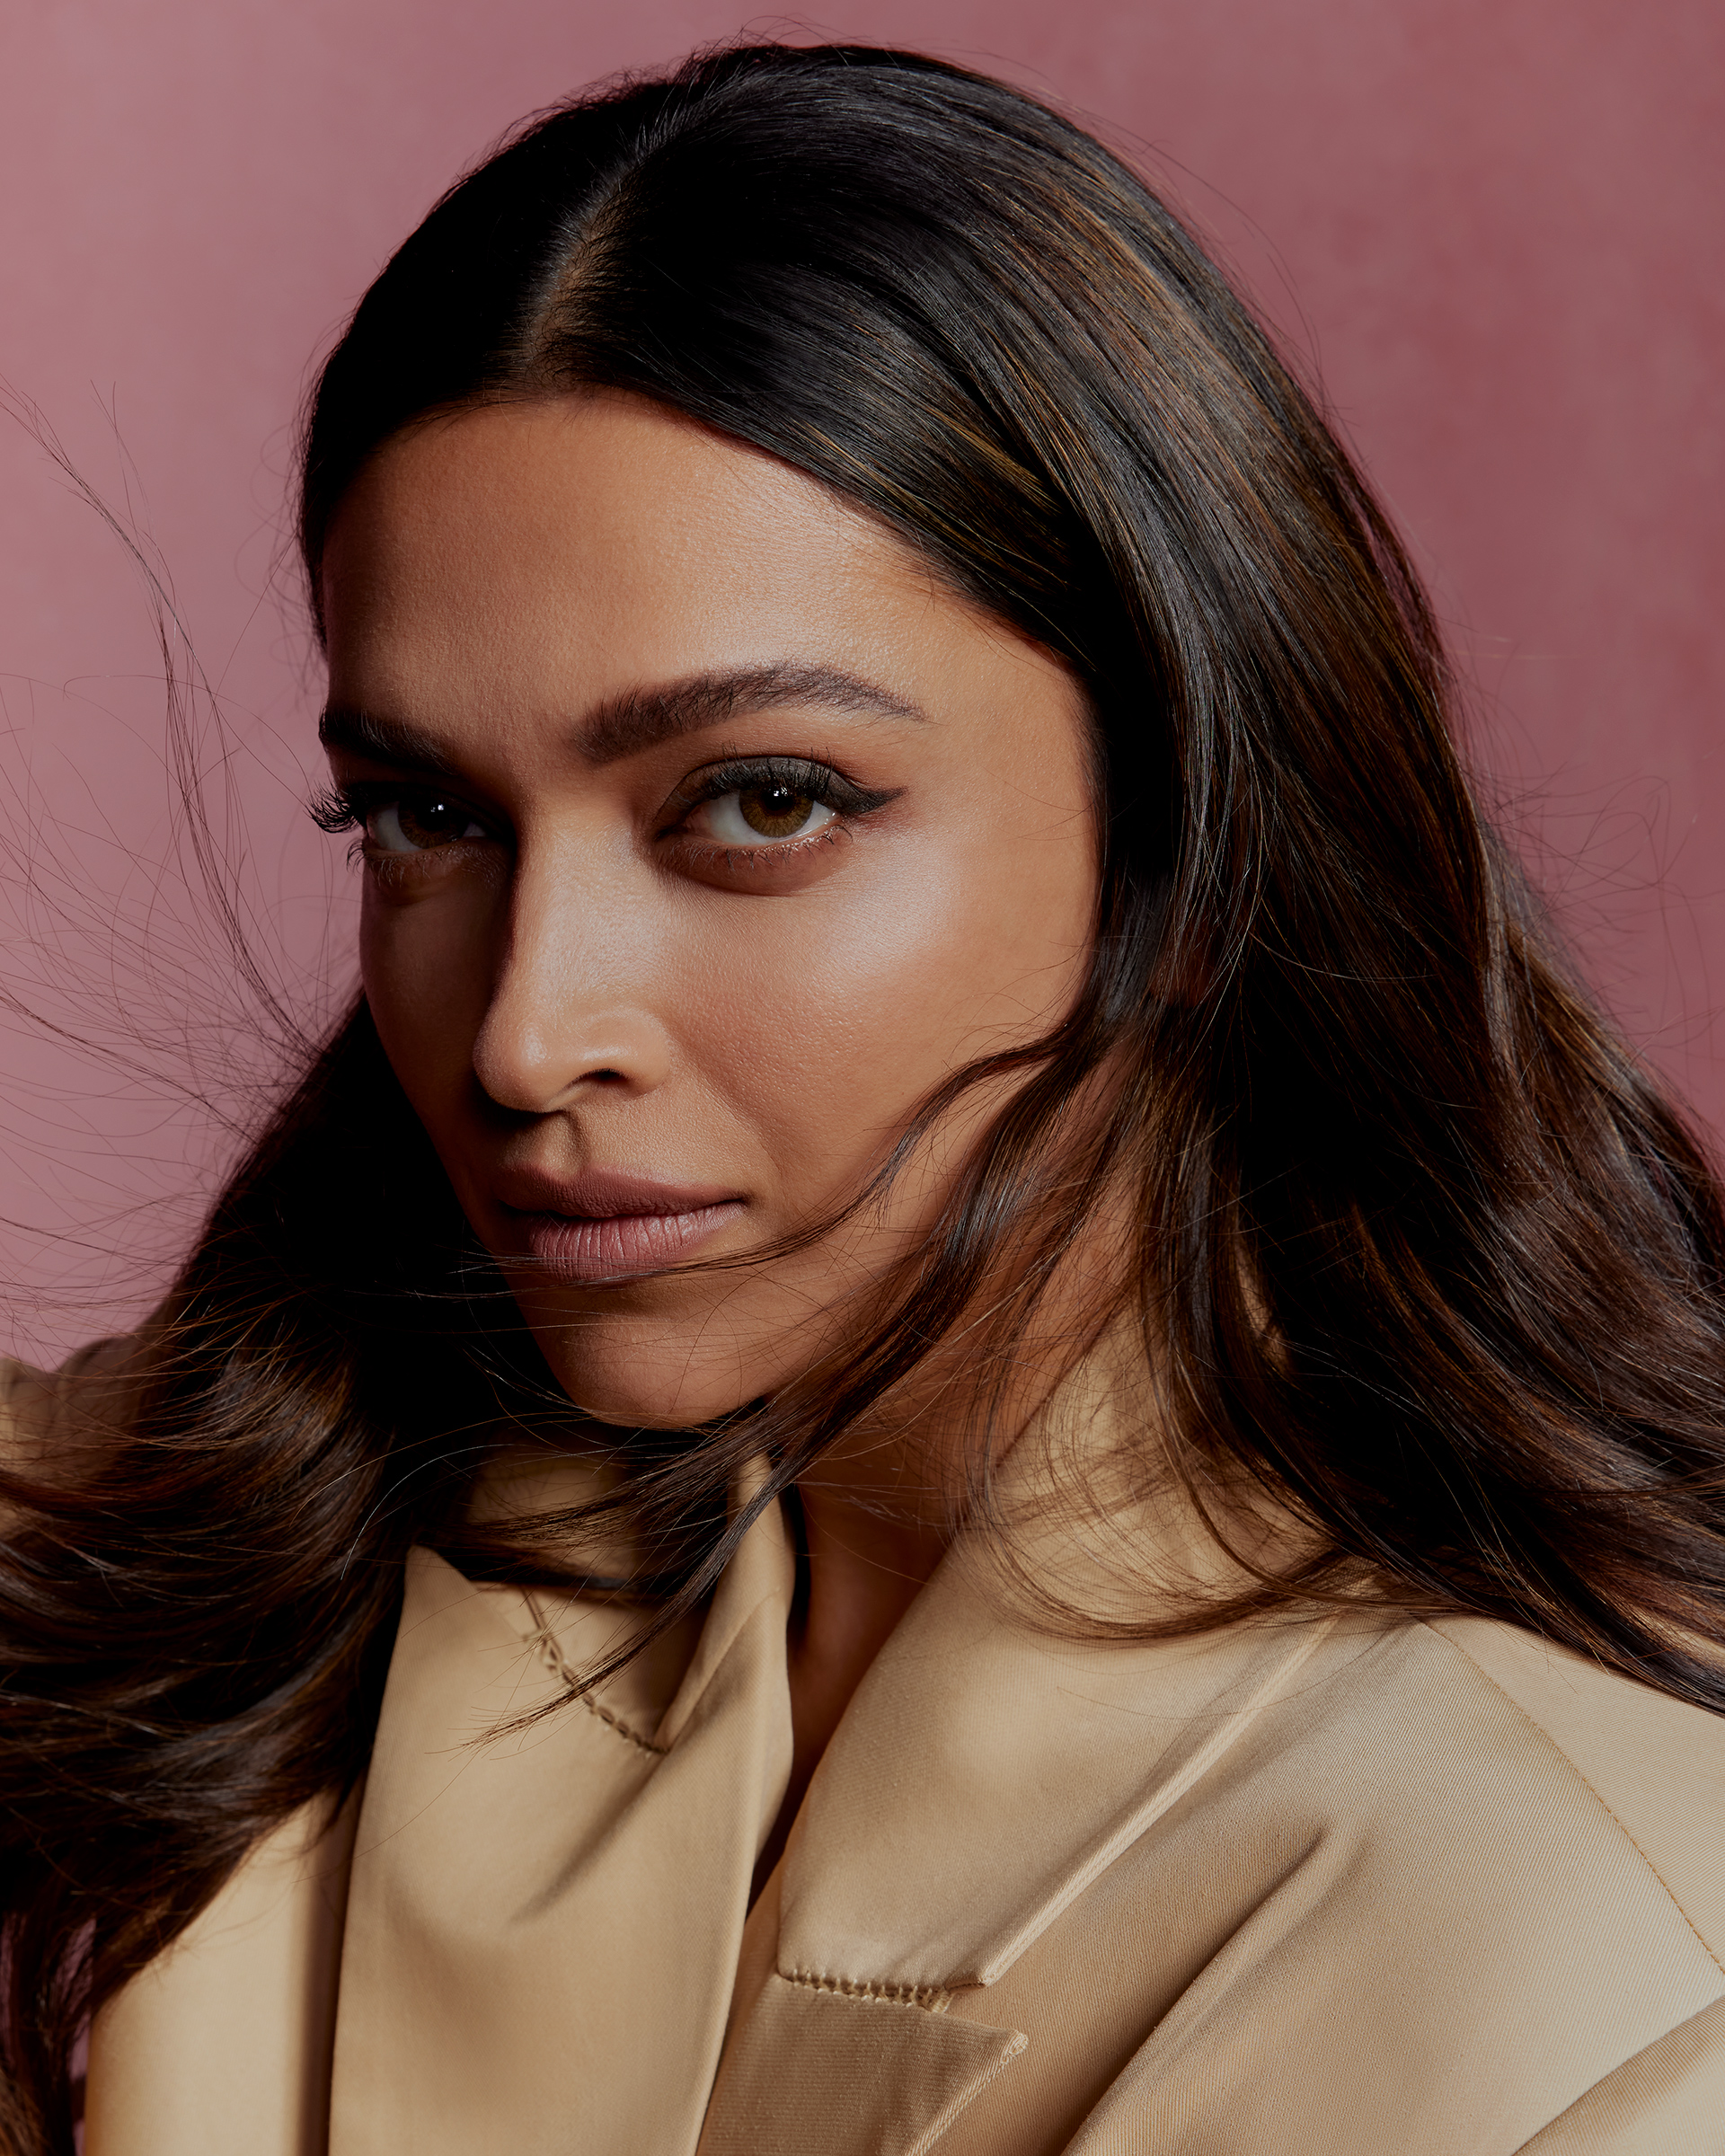 This just in: Deepika Padukone is the first Indian to become a